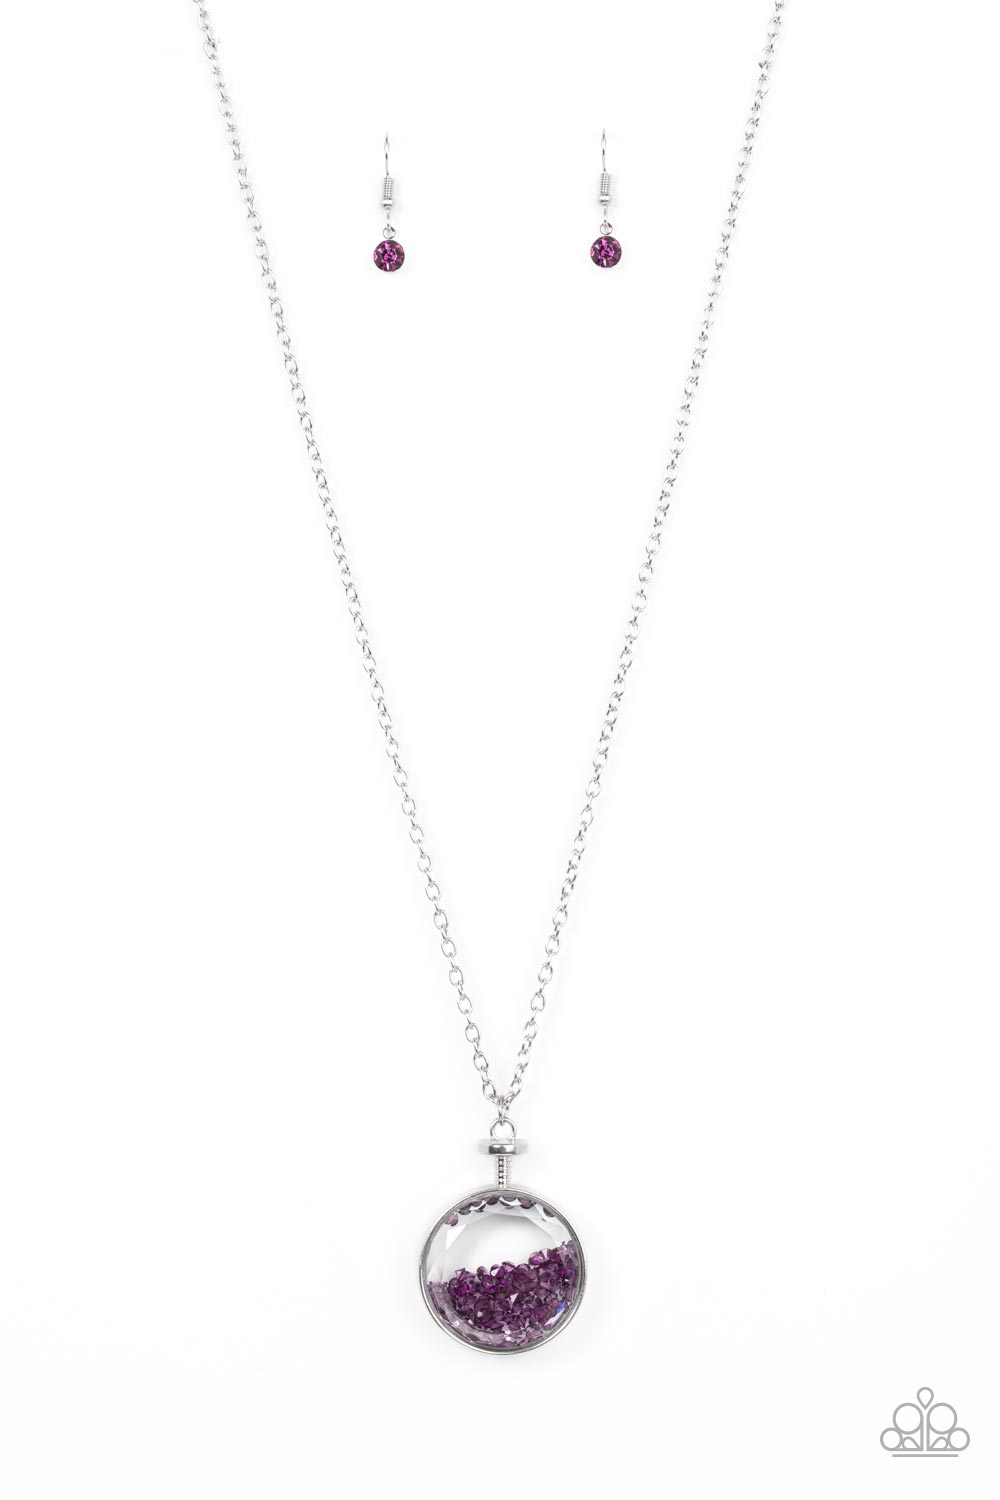 Twinkly Treasury Purple Necklace - Paparazzi Accessories  A glitzy collection of twinkly purple crystals sparkle inside a faceted glass and silver fitting, resulting in a glittery trinket at the bottom of an extended silver chain. Features an adjustable clasp closure.  Sold as one individual necklace. Includes one pair of matching earrings.